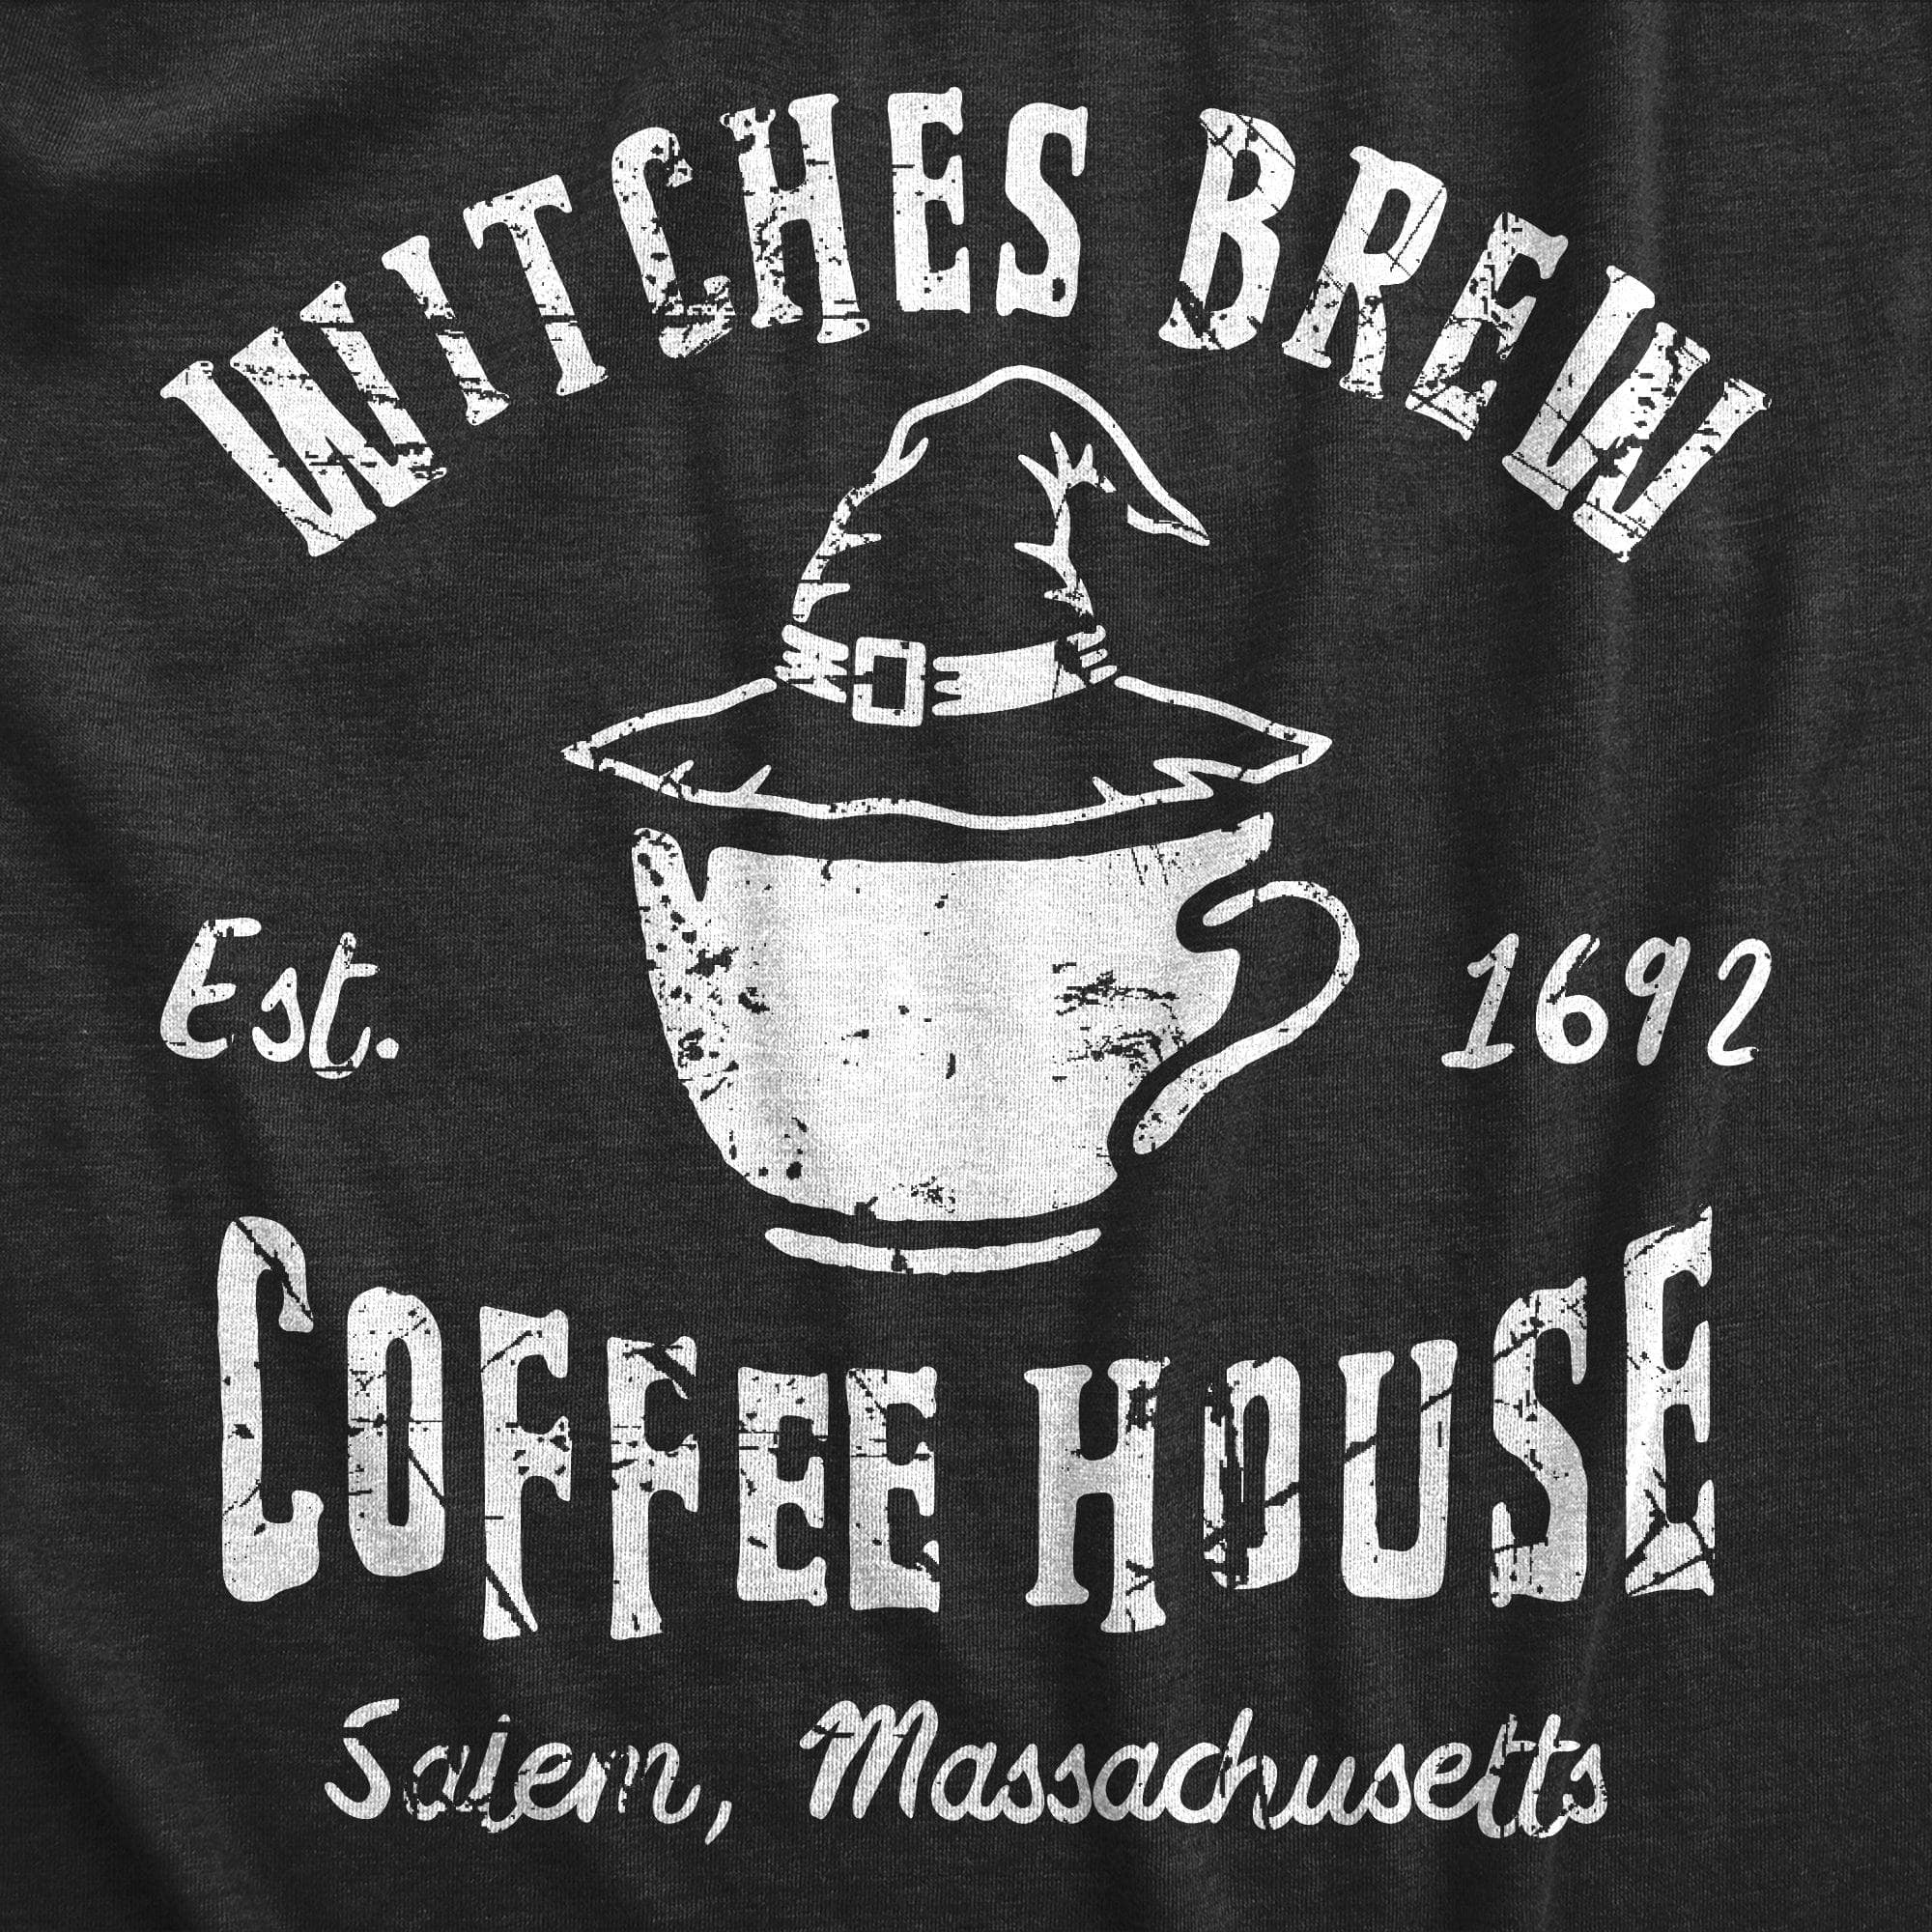 Witches Brew Coffee House Women's Tshirt  -  Crazy Dog T-Shirts